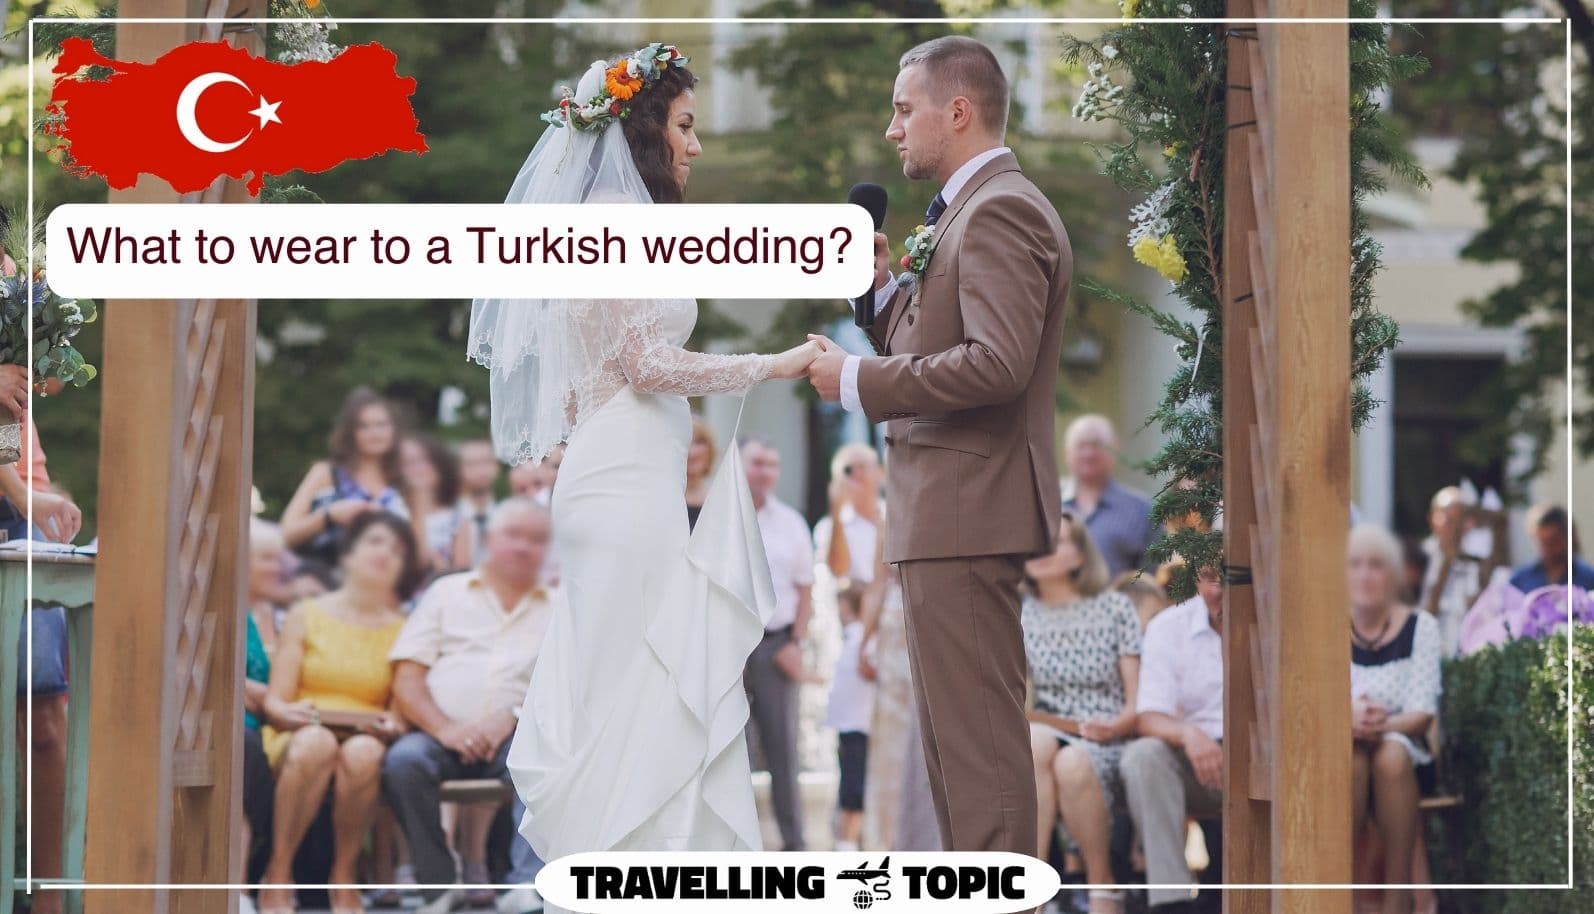 What to wear to a Turkish wedding?